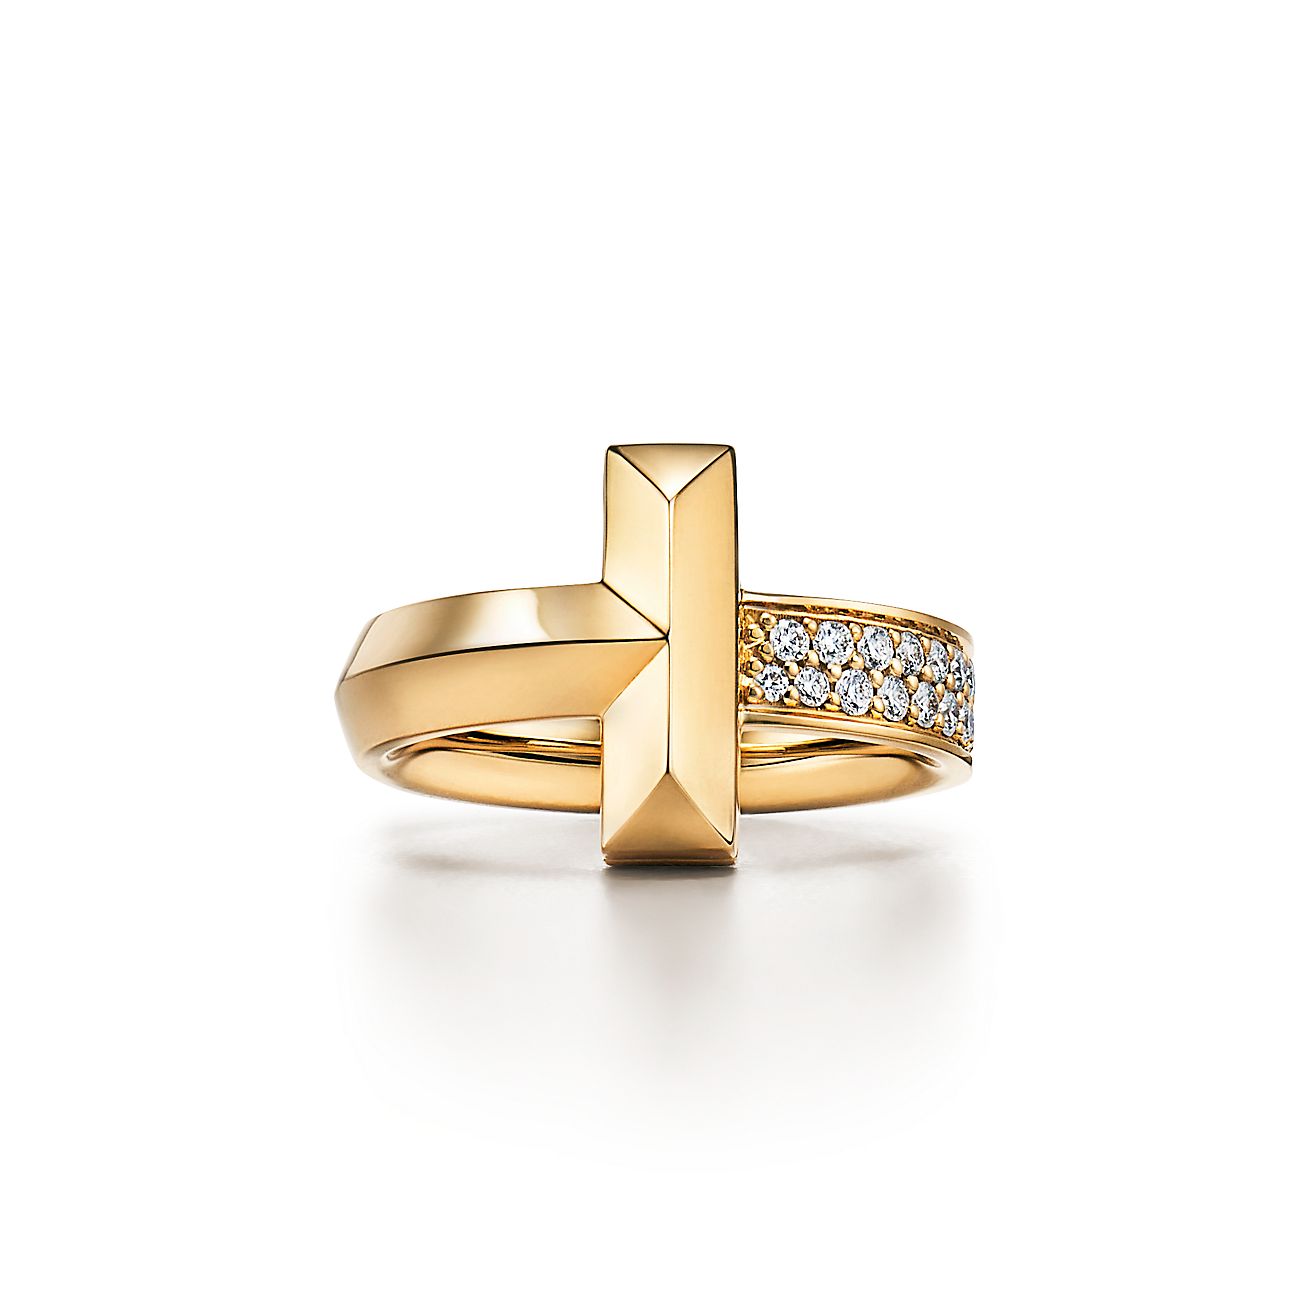 Tiffany T T1 Ring in Yellow Gold with Diamonds, 4.5 mm Wide 